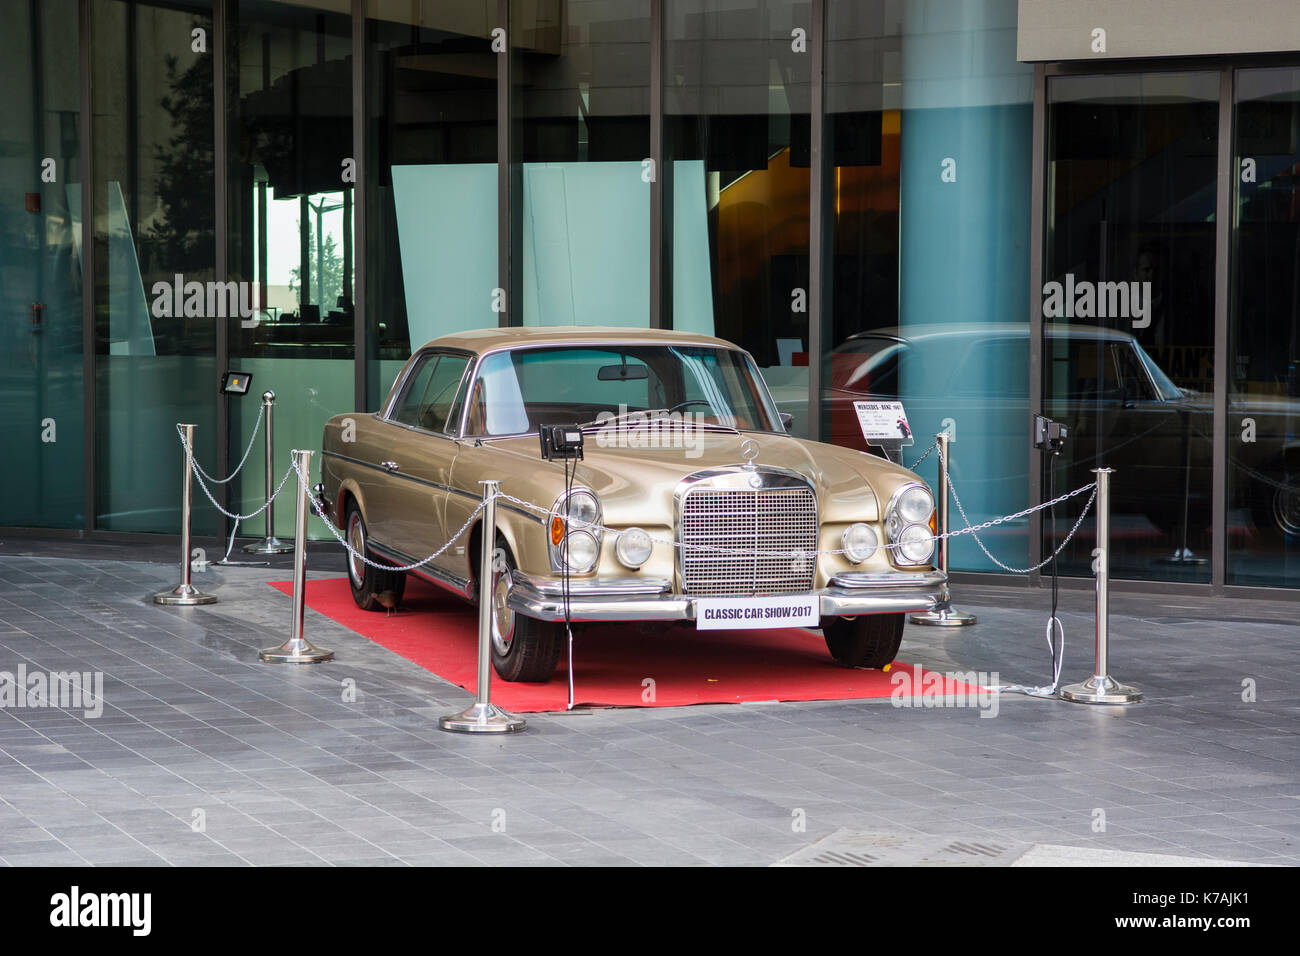 Beirut, Lebanon. 15th Sep, 2017. 1967 Mercedes Benz 280 SE Coupe on Display at the Classic car show in Beirut Souks, Beirut Lebanon Credit: Mohamad Itani/Alamy Live News Stock Photo